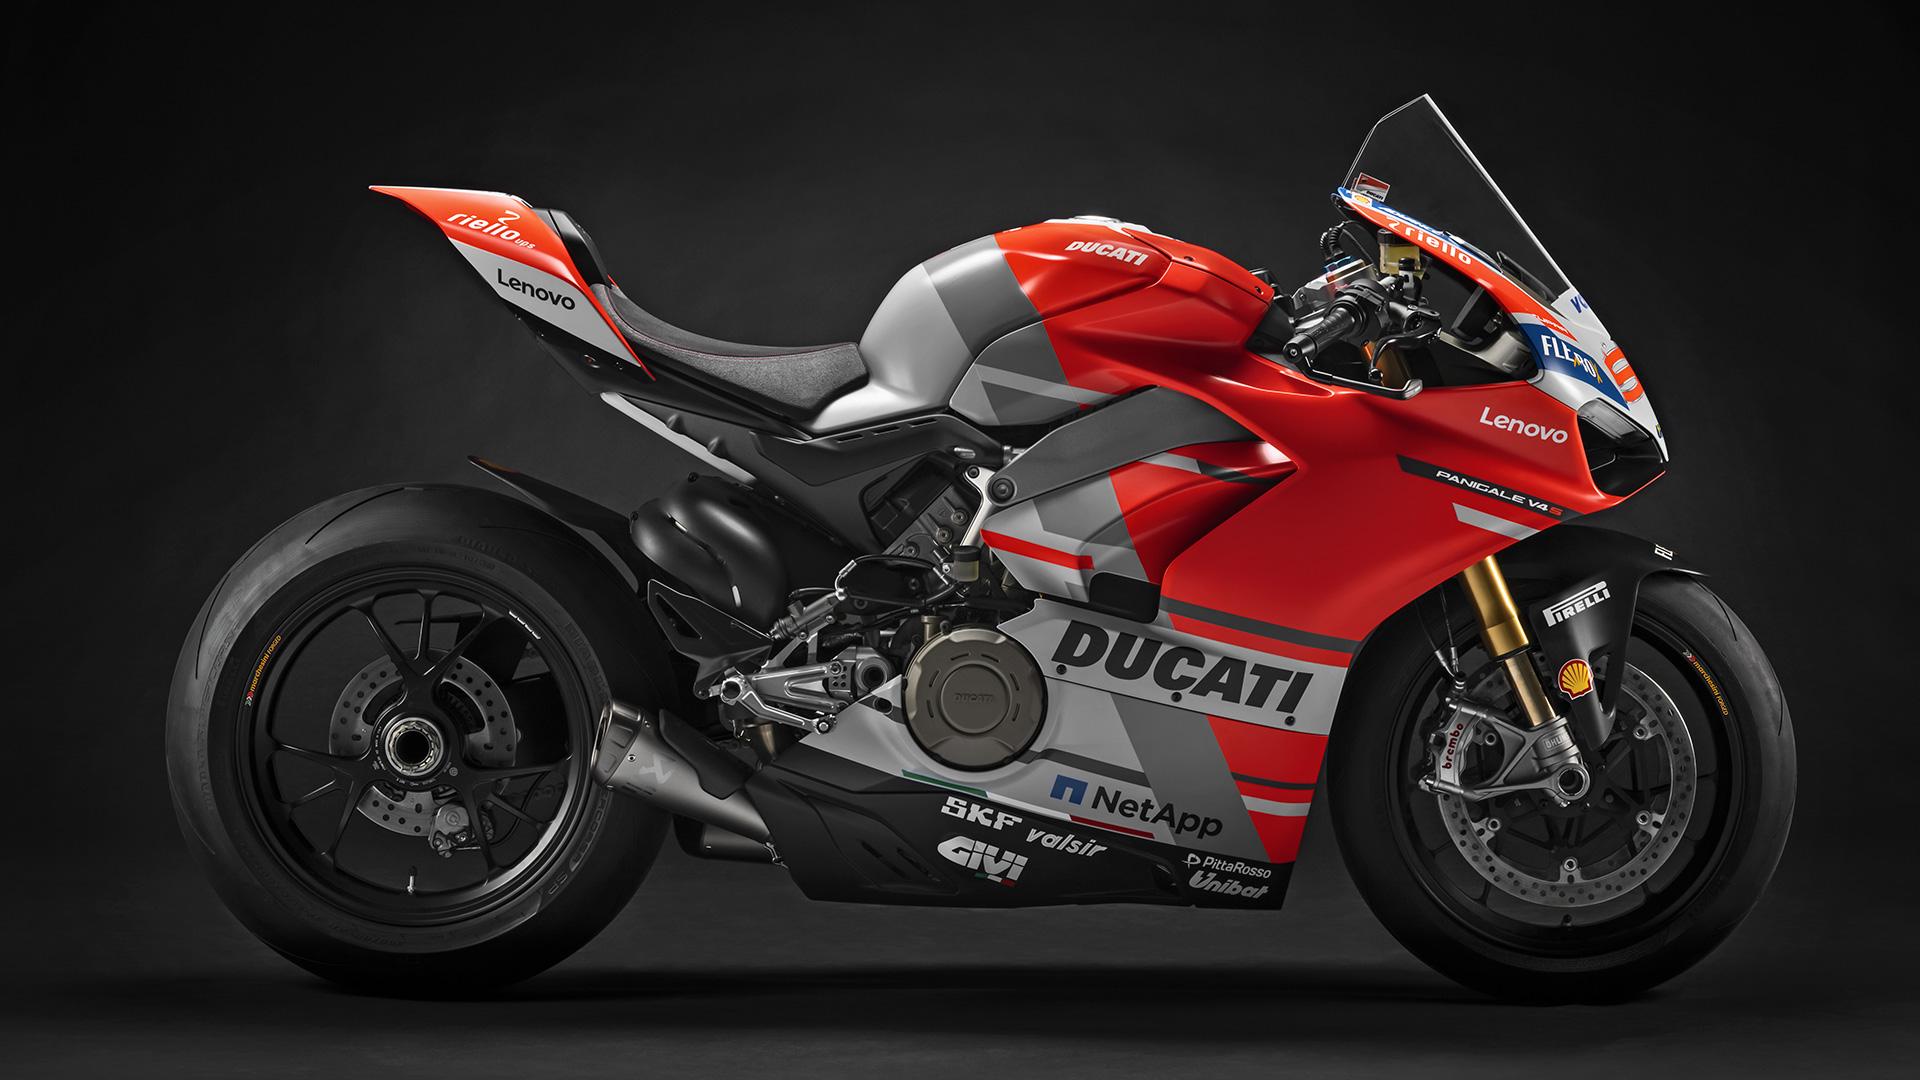 The Panigale V4 motorcylces from the “Race of Champions” to be auctioned